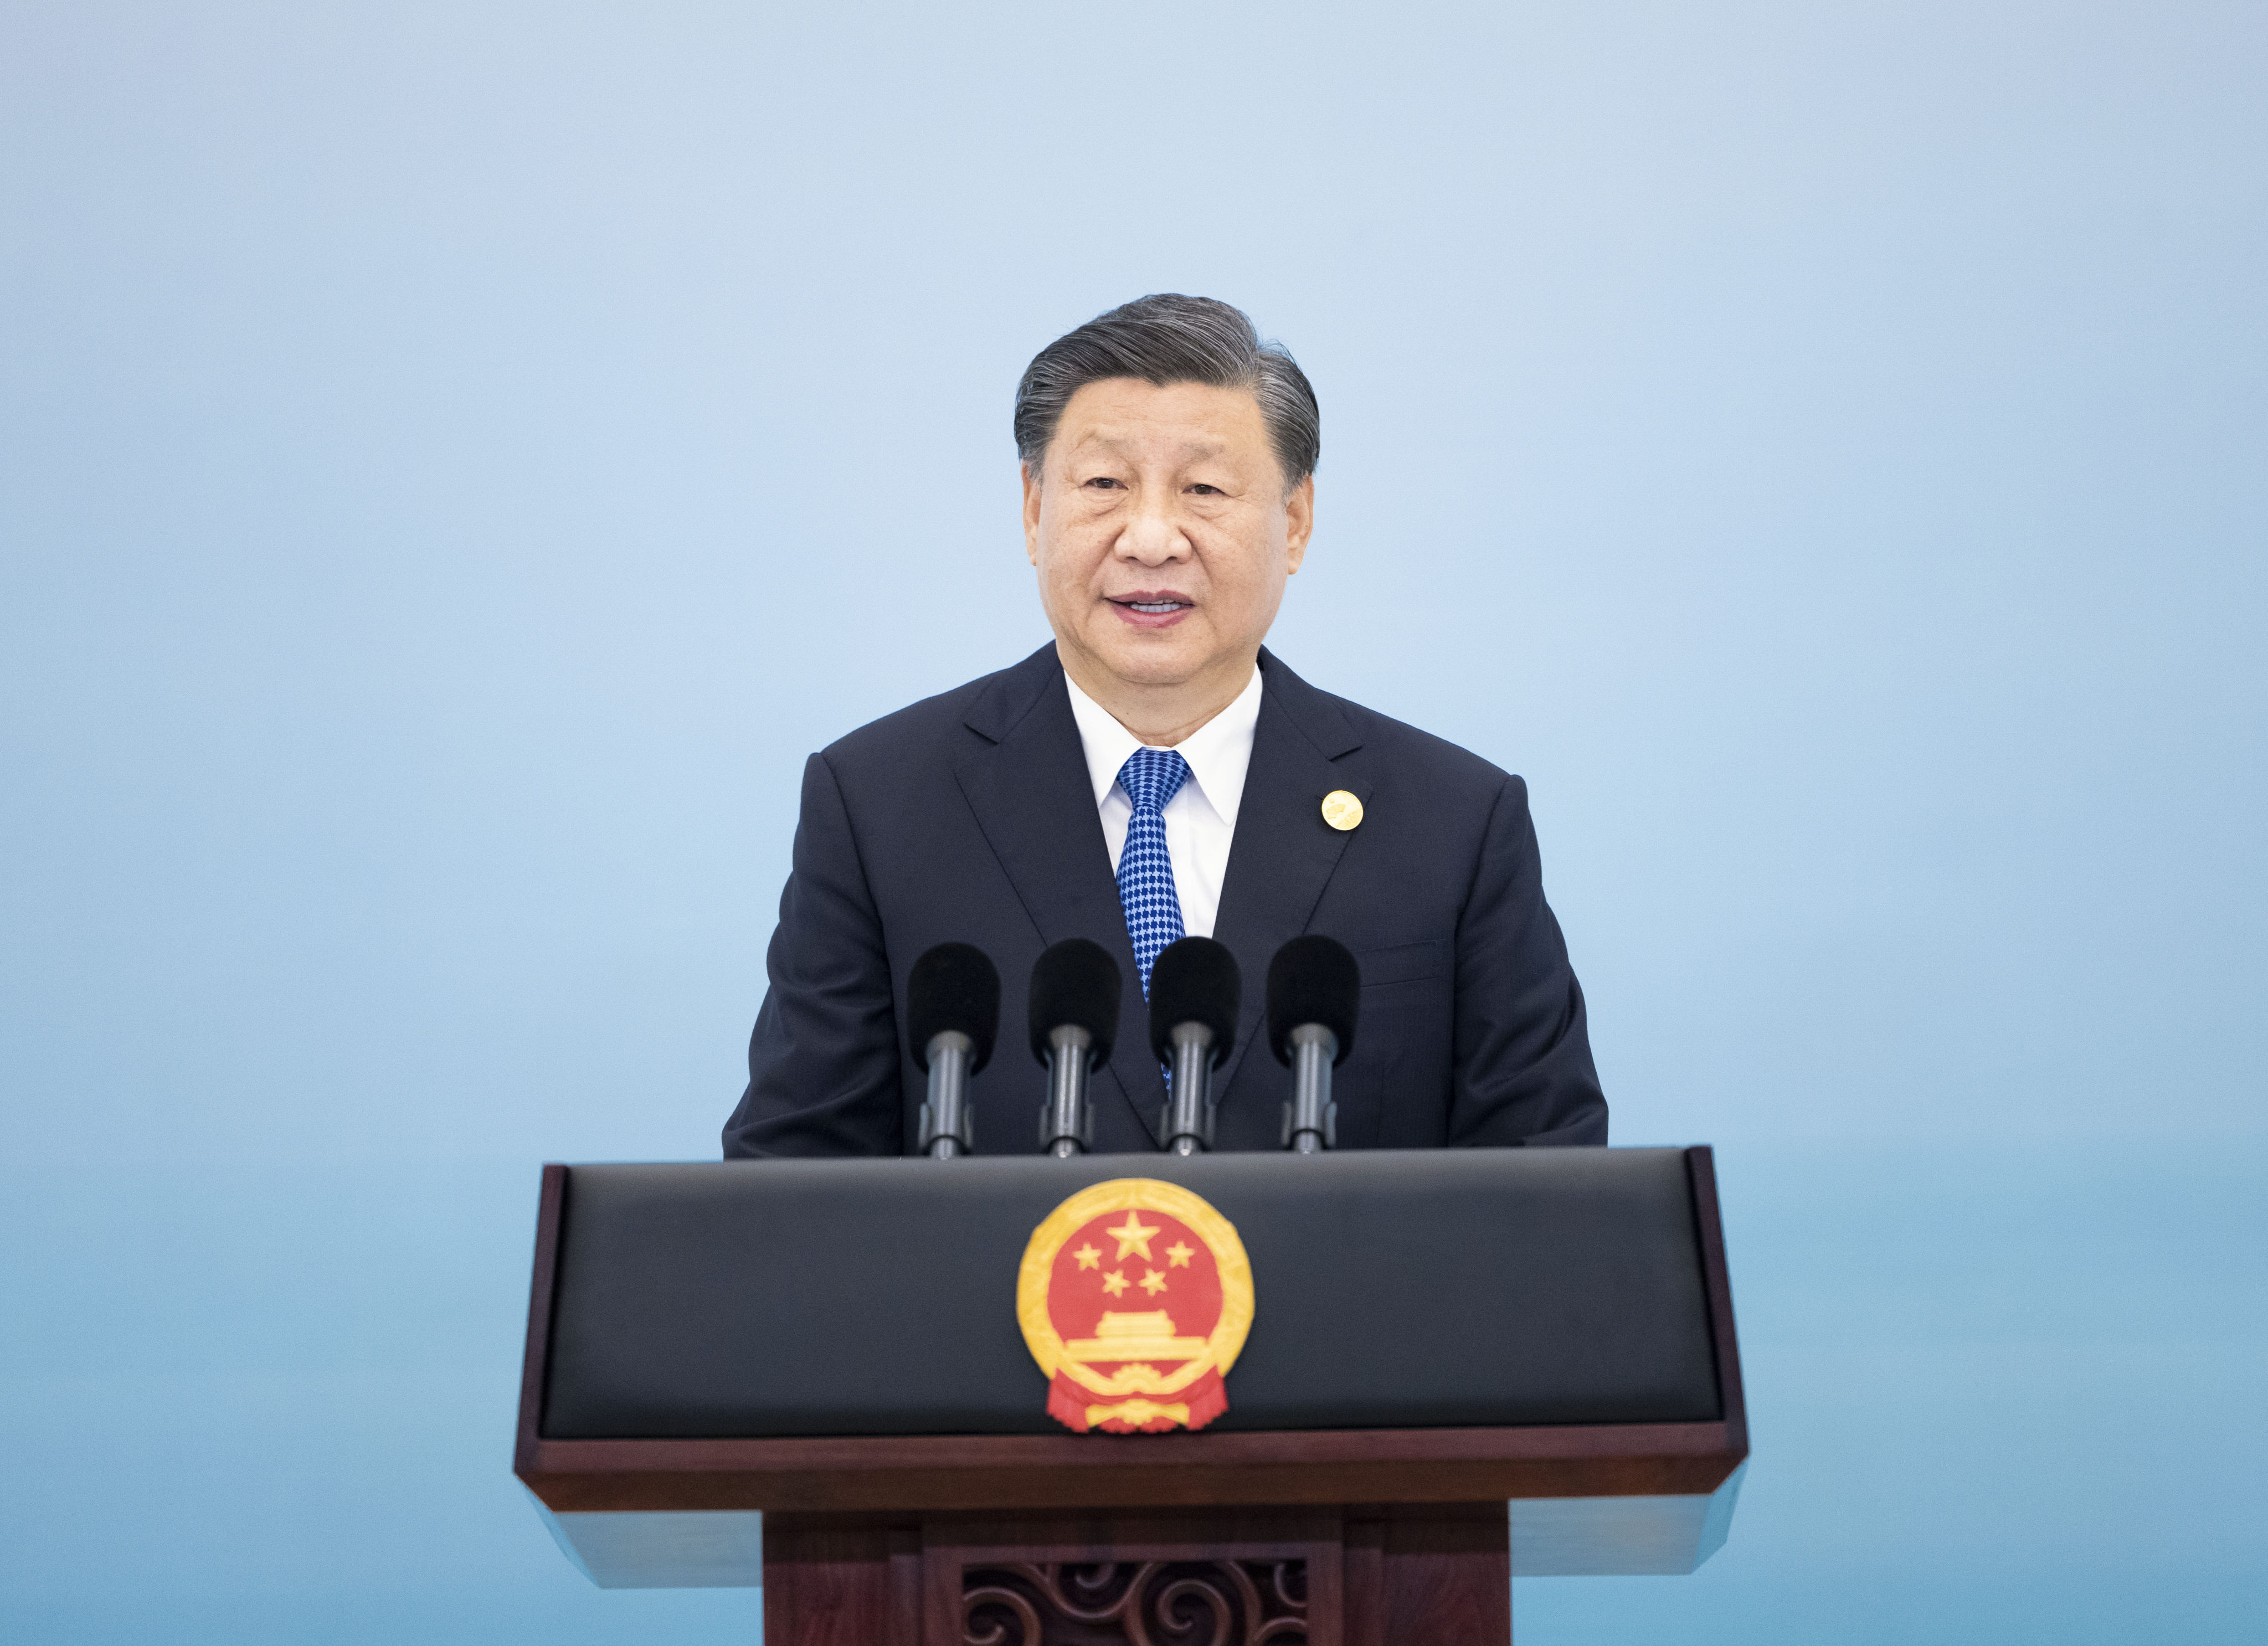 President Xi Jinping, seen here speaking in Zhejiang province on Saturday, has said China’s free-trade zones must strive for innovation and breakthroughs. Photo: Xinhua